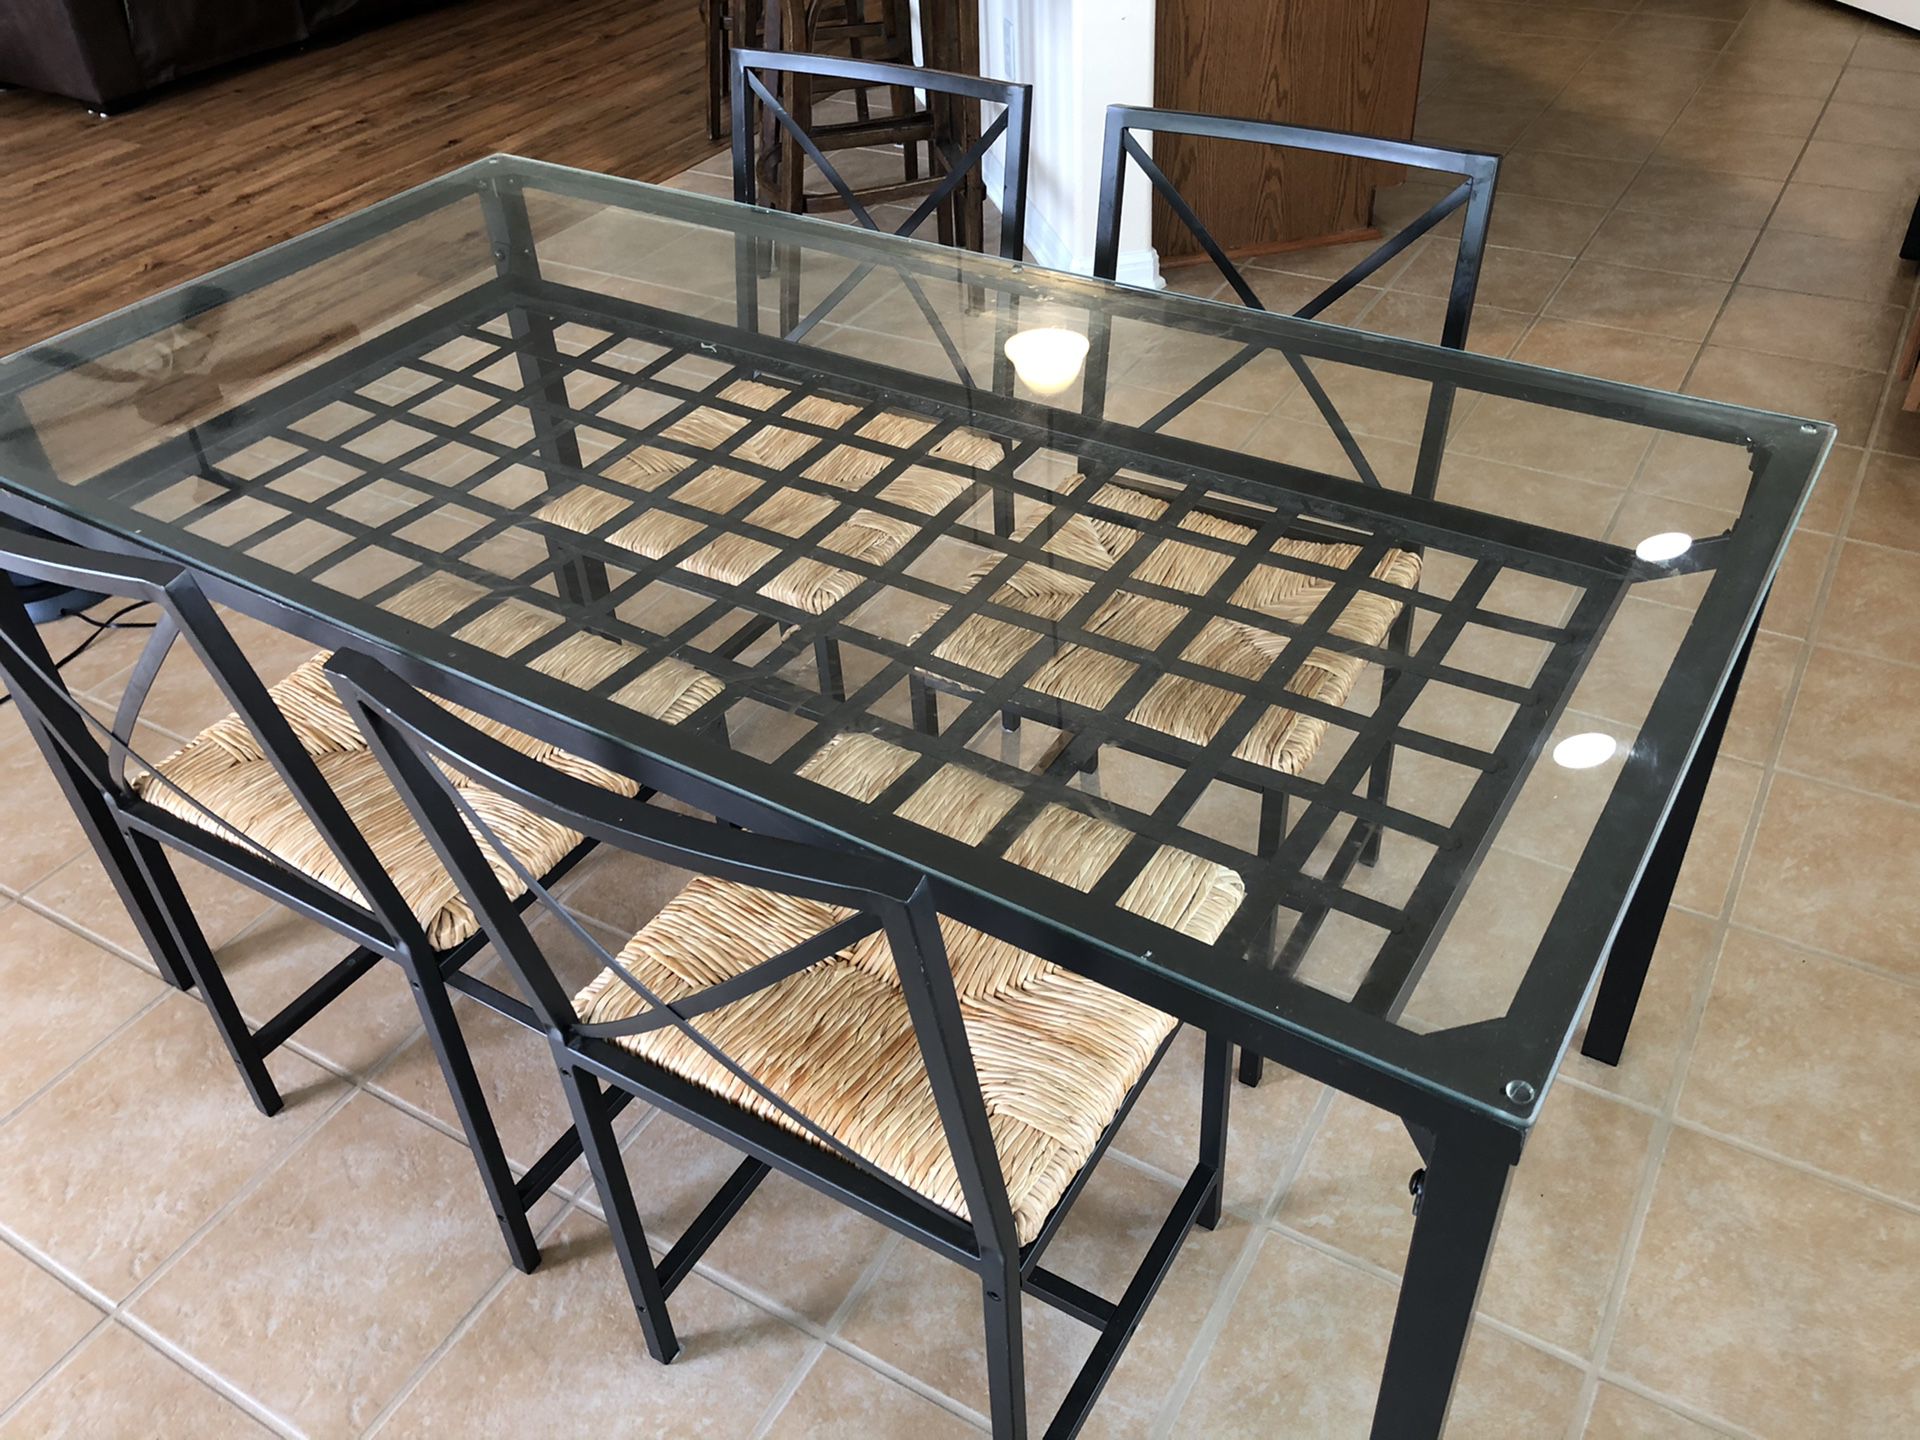 Dining set (Table + 4 chairs)